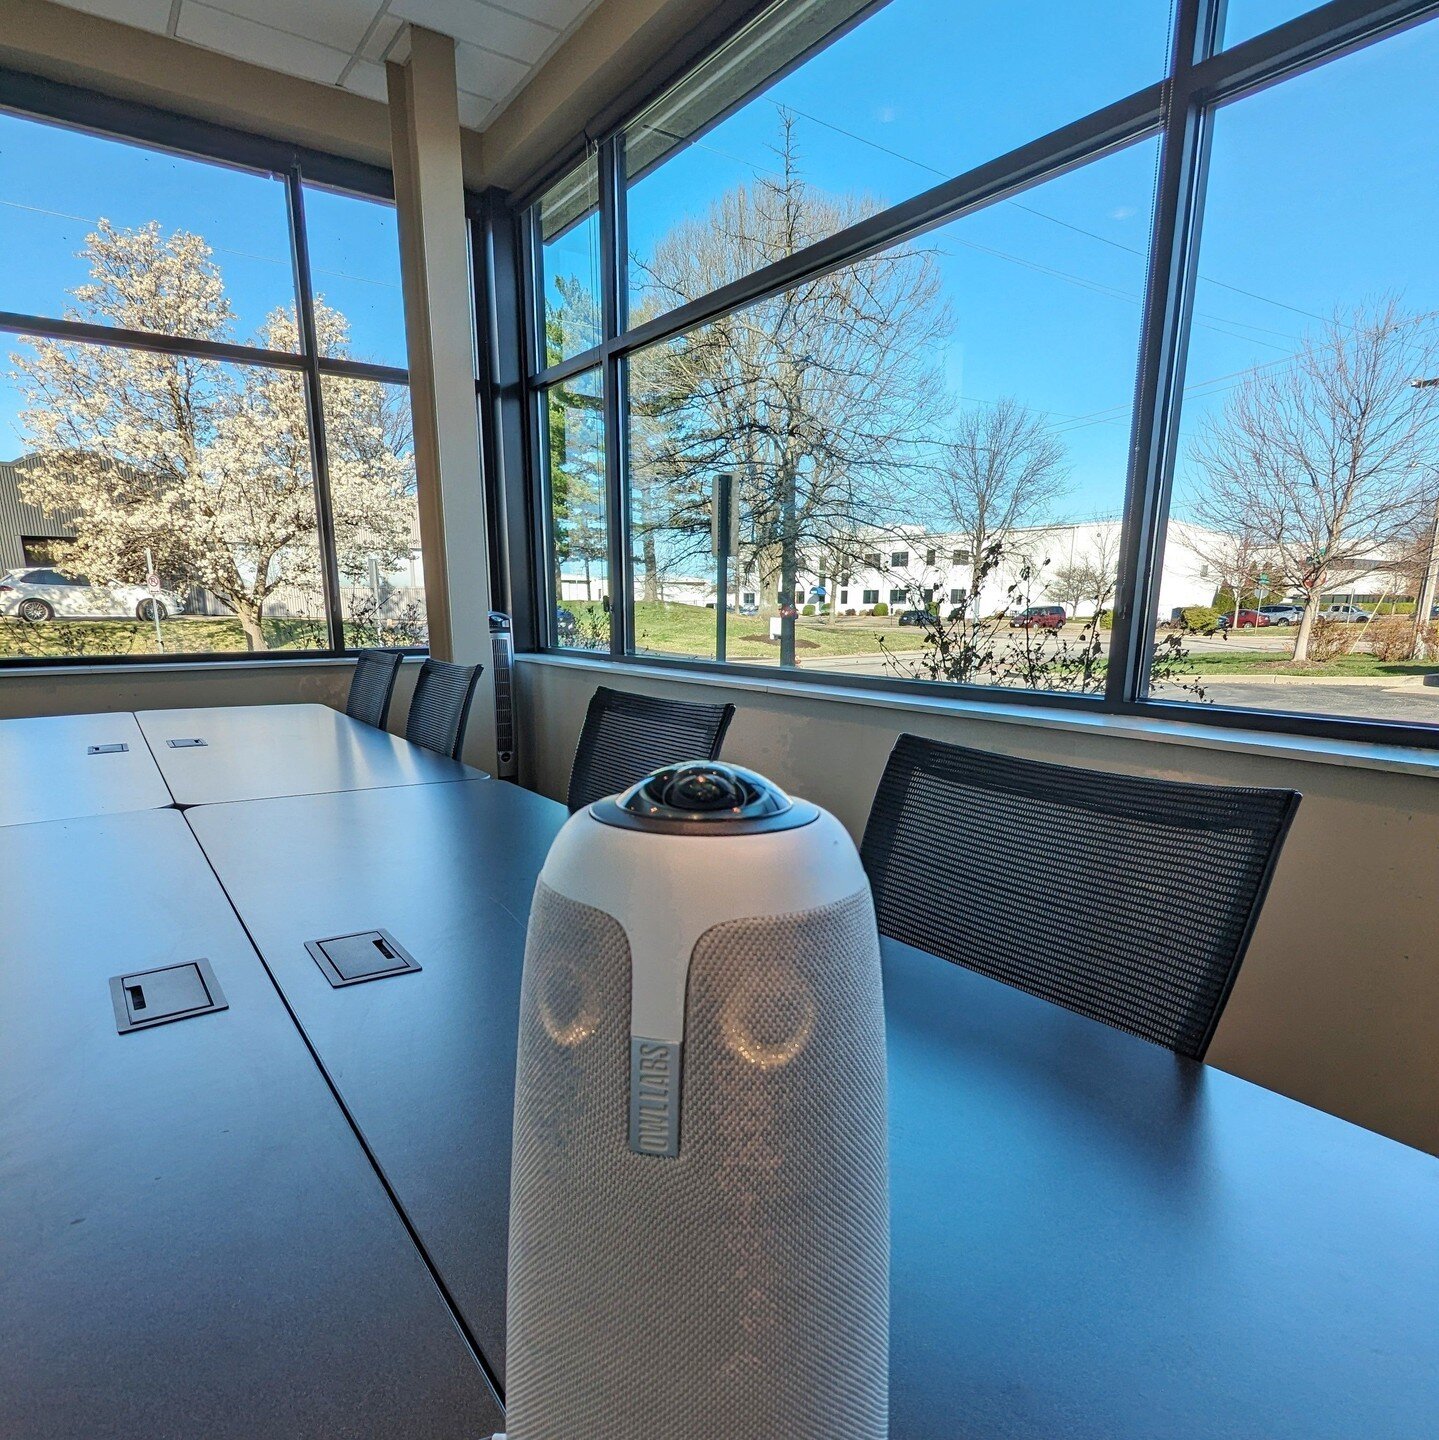 Big news! ✨ Our conference rooms recently got a major upgrade with the addition of video conferencing capabilities. With the Meeting Owl from @owllabs, your colleagues can join meetings seamlessly from anywhere, making collaboration a breeze. 

Ready